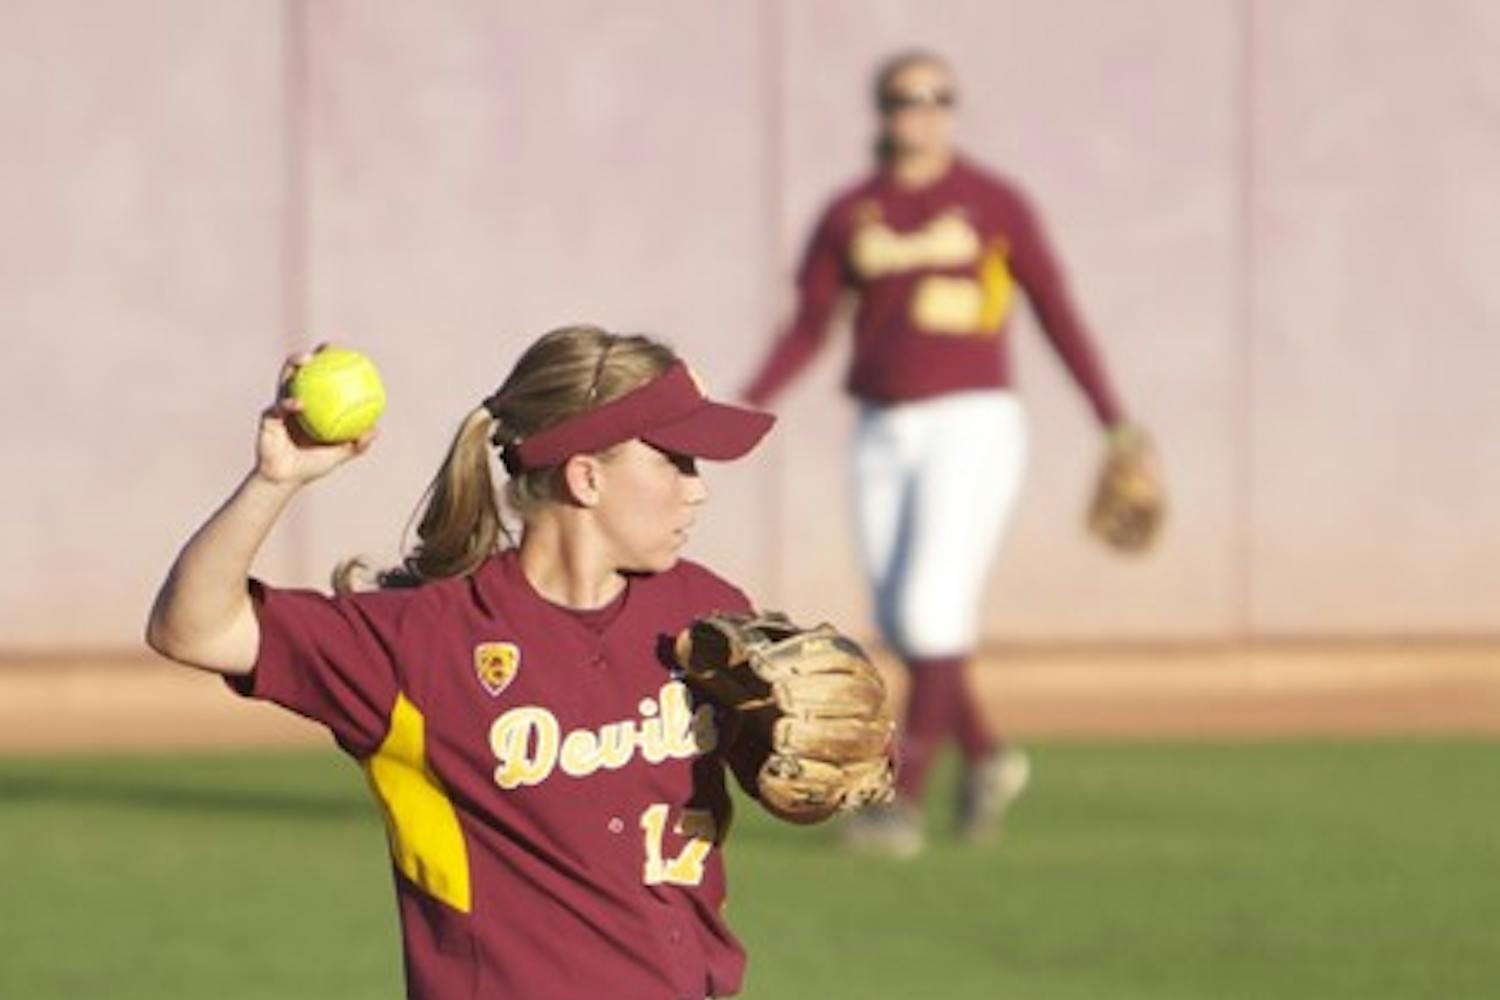 Plate Presence: ASU junior infielder Katelyn Boyd warms up in between innings during the Sun Devils’ victory over Campbell on March 10. Boyd and her .483 batting average will face UC Santa Barbara for a three-game series starting Friday. (Photo by Scott Stuk)